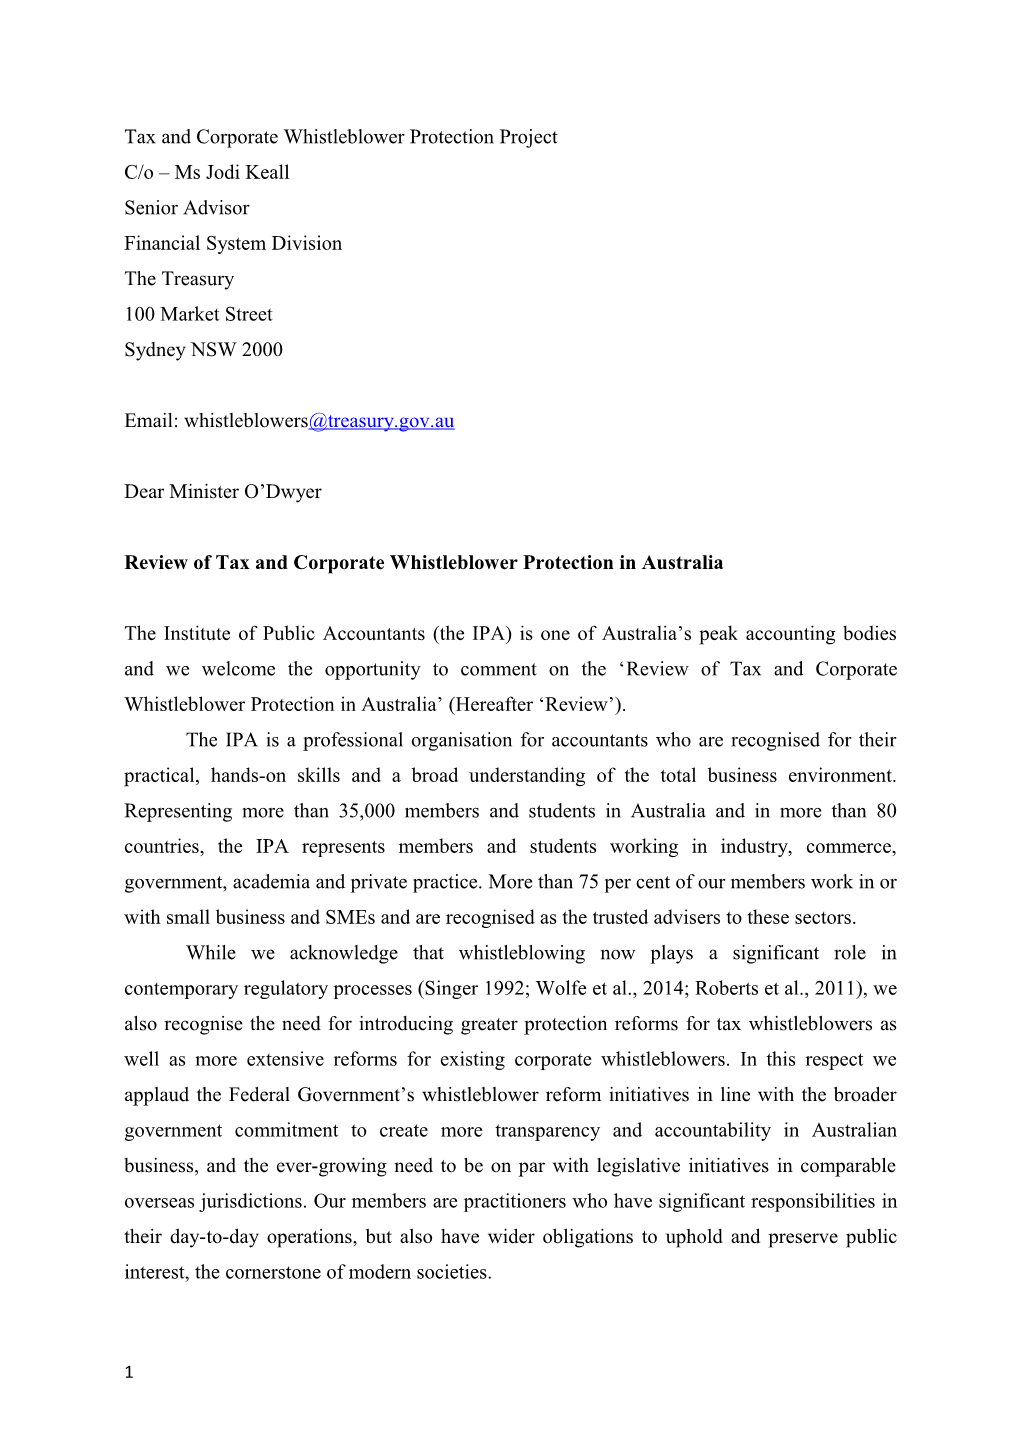 Institute of Public Accountants - Submission in Response To: Review of Tax and Corporate